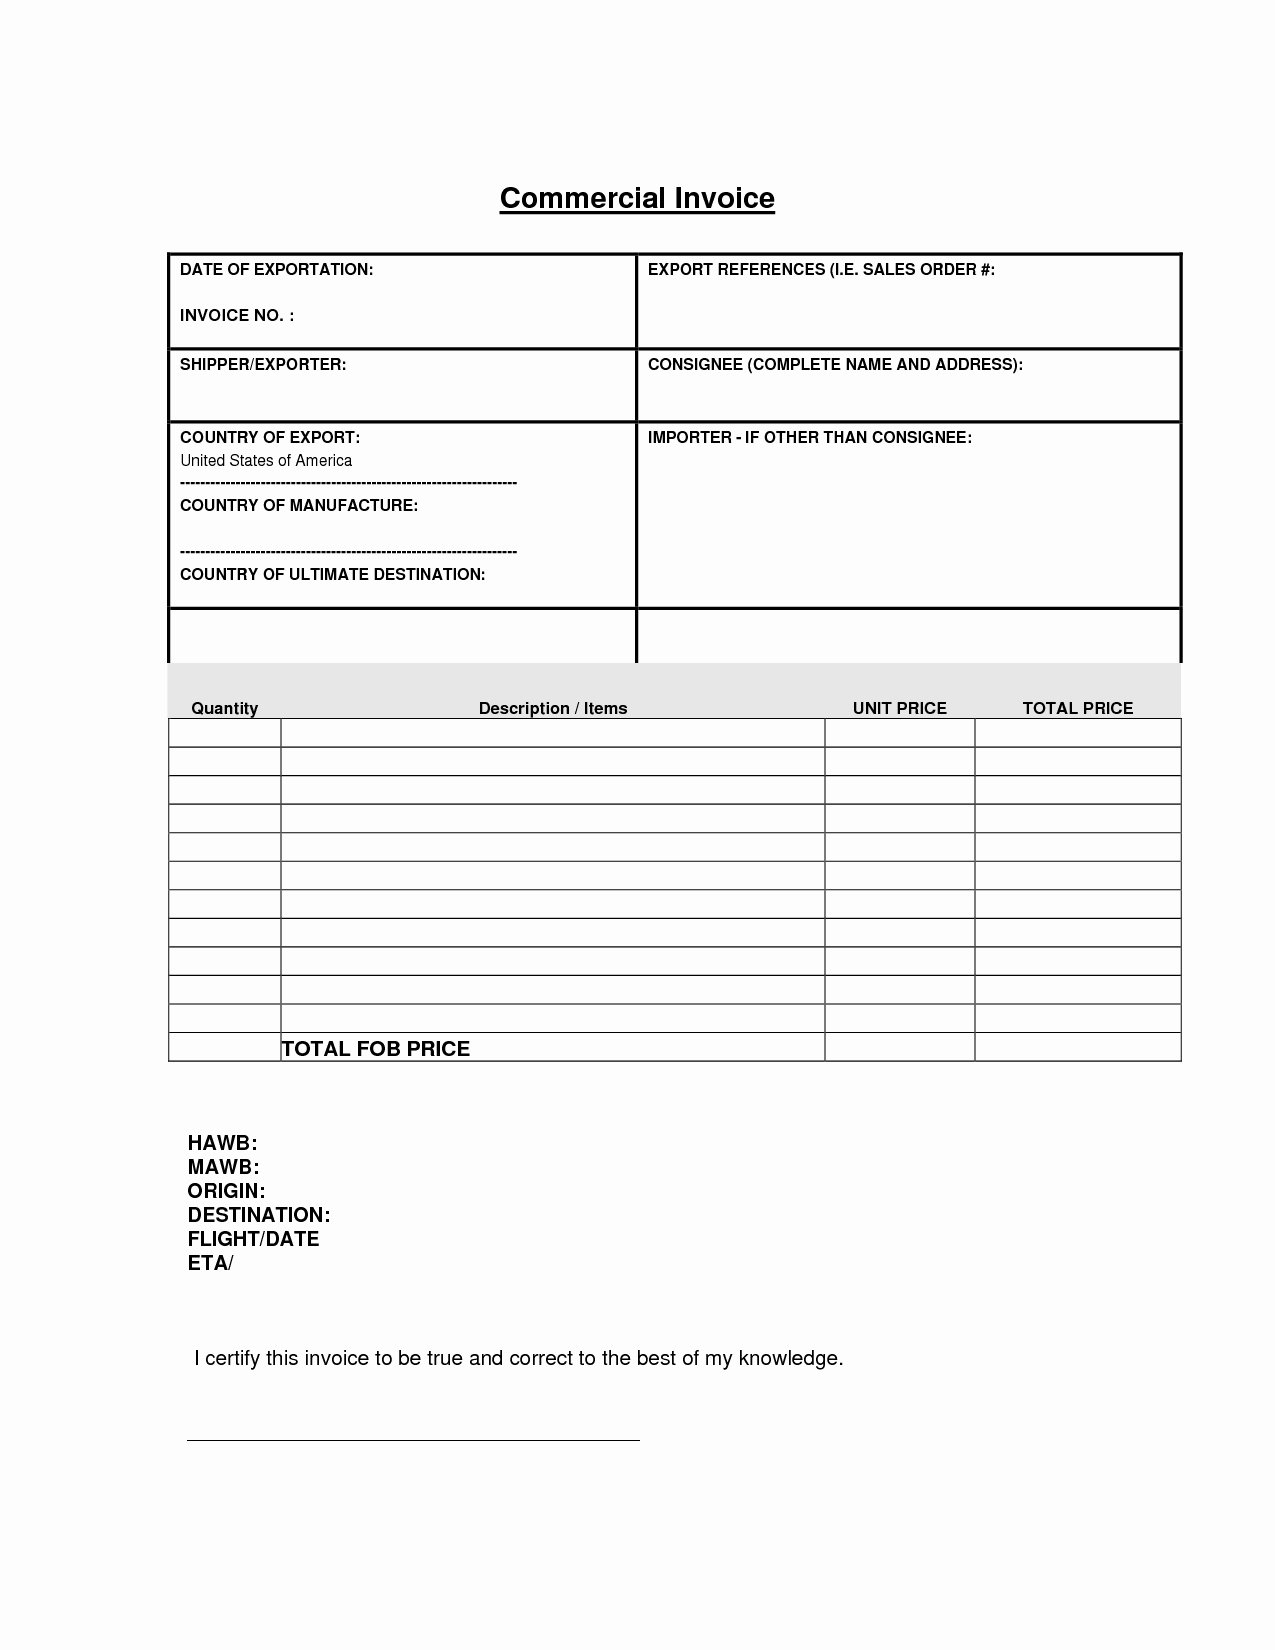 Mercial Invoice Sample Excel Invoice Template Ideas